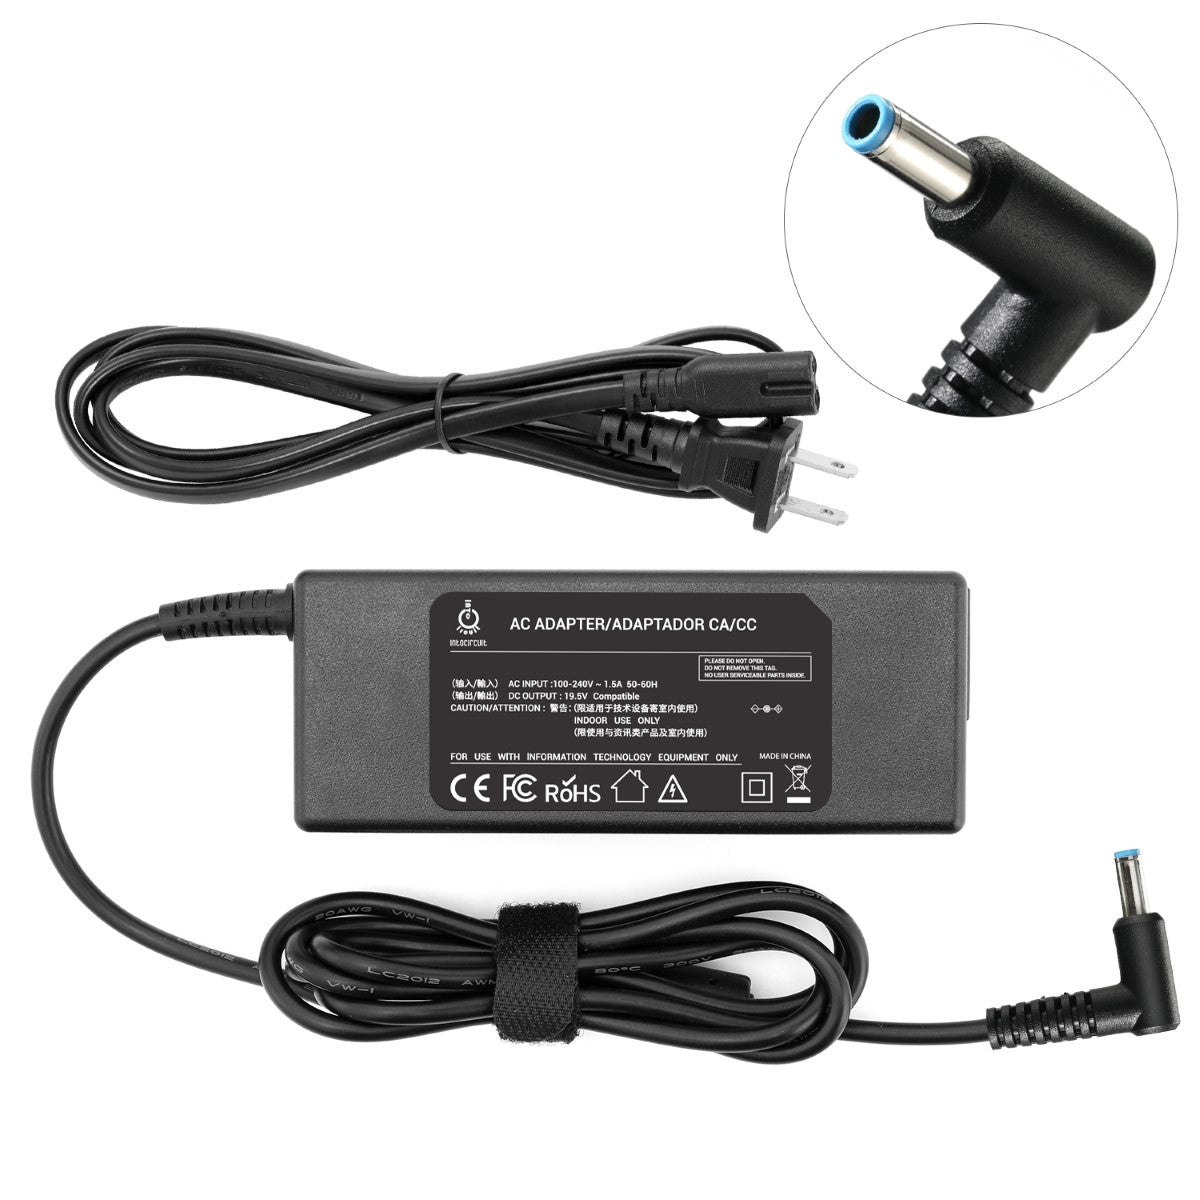 Charger for HP 410 G1 Notebook